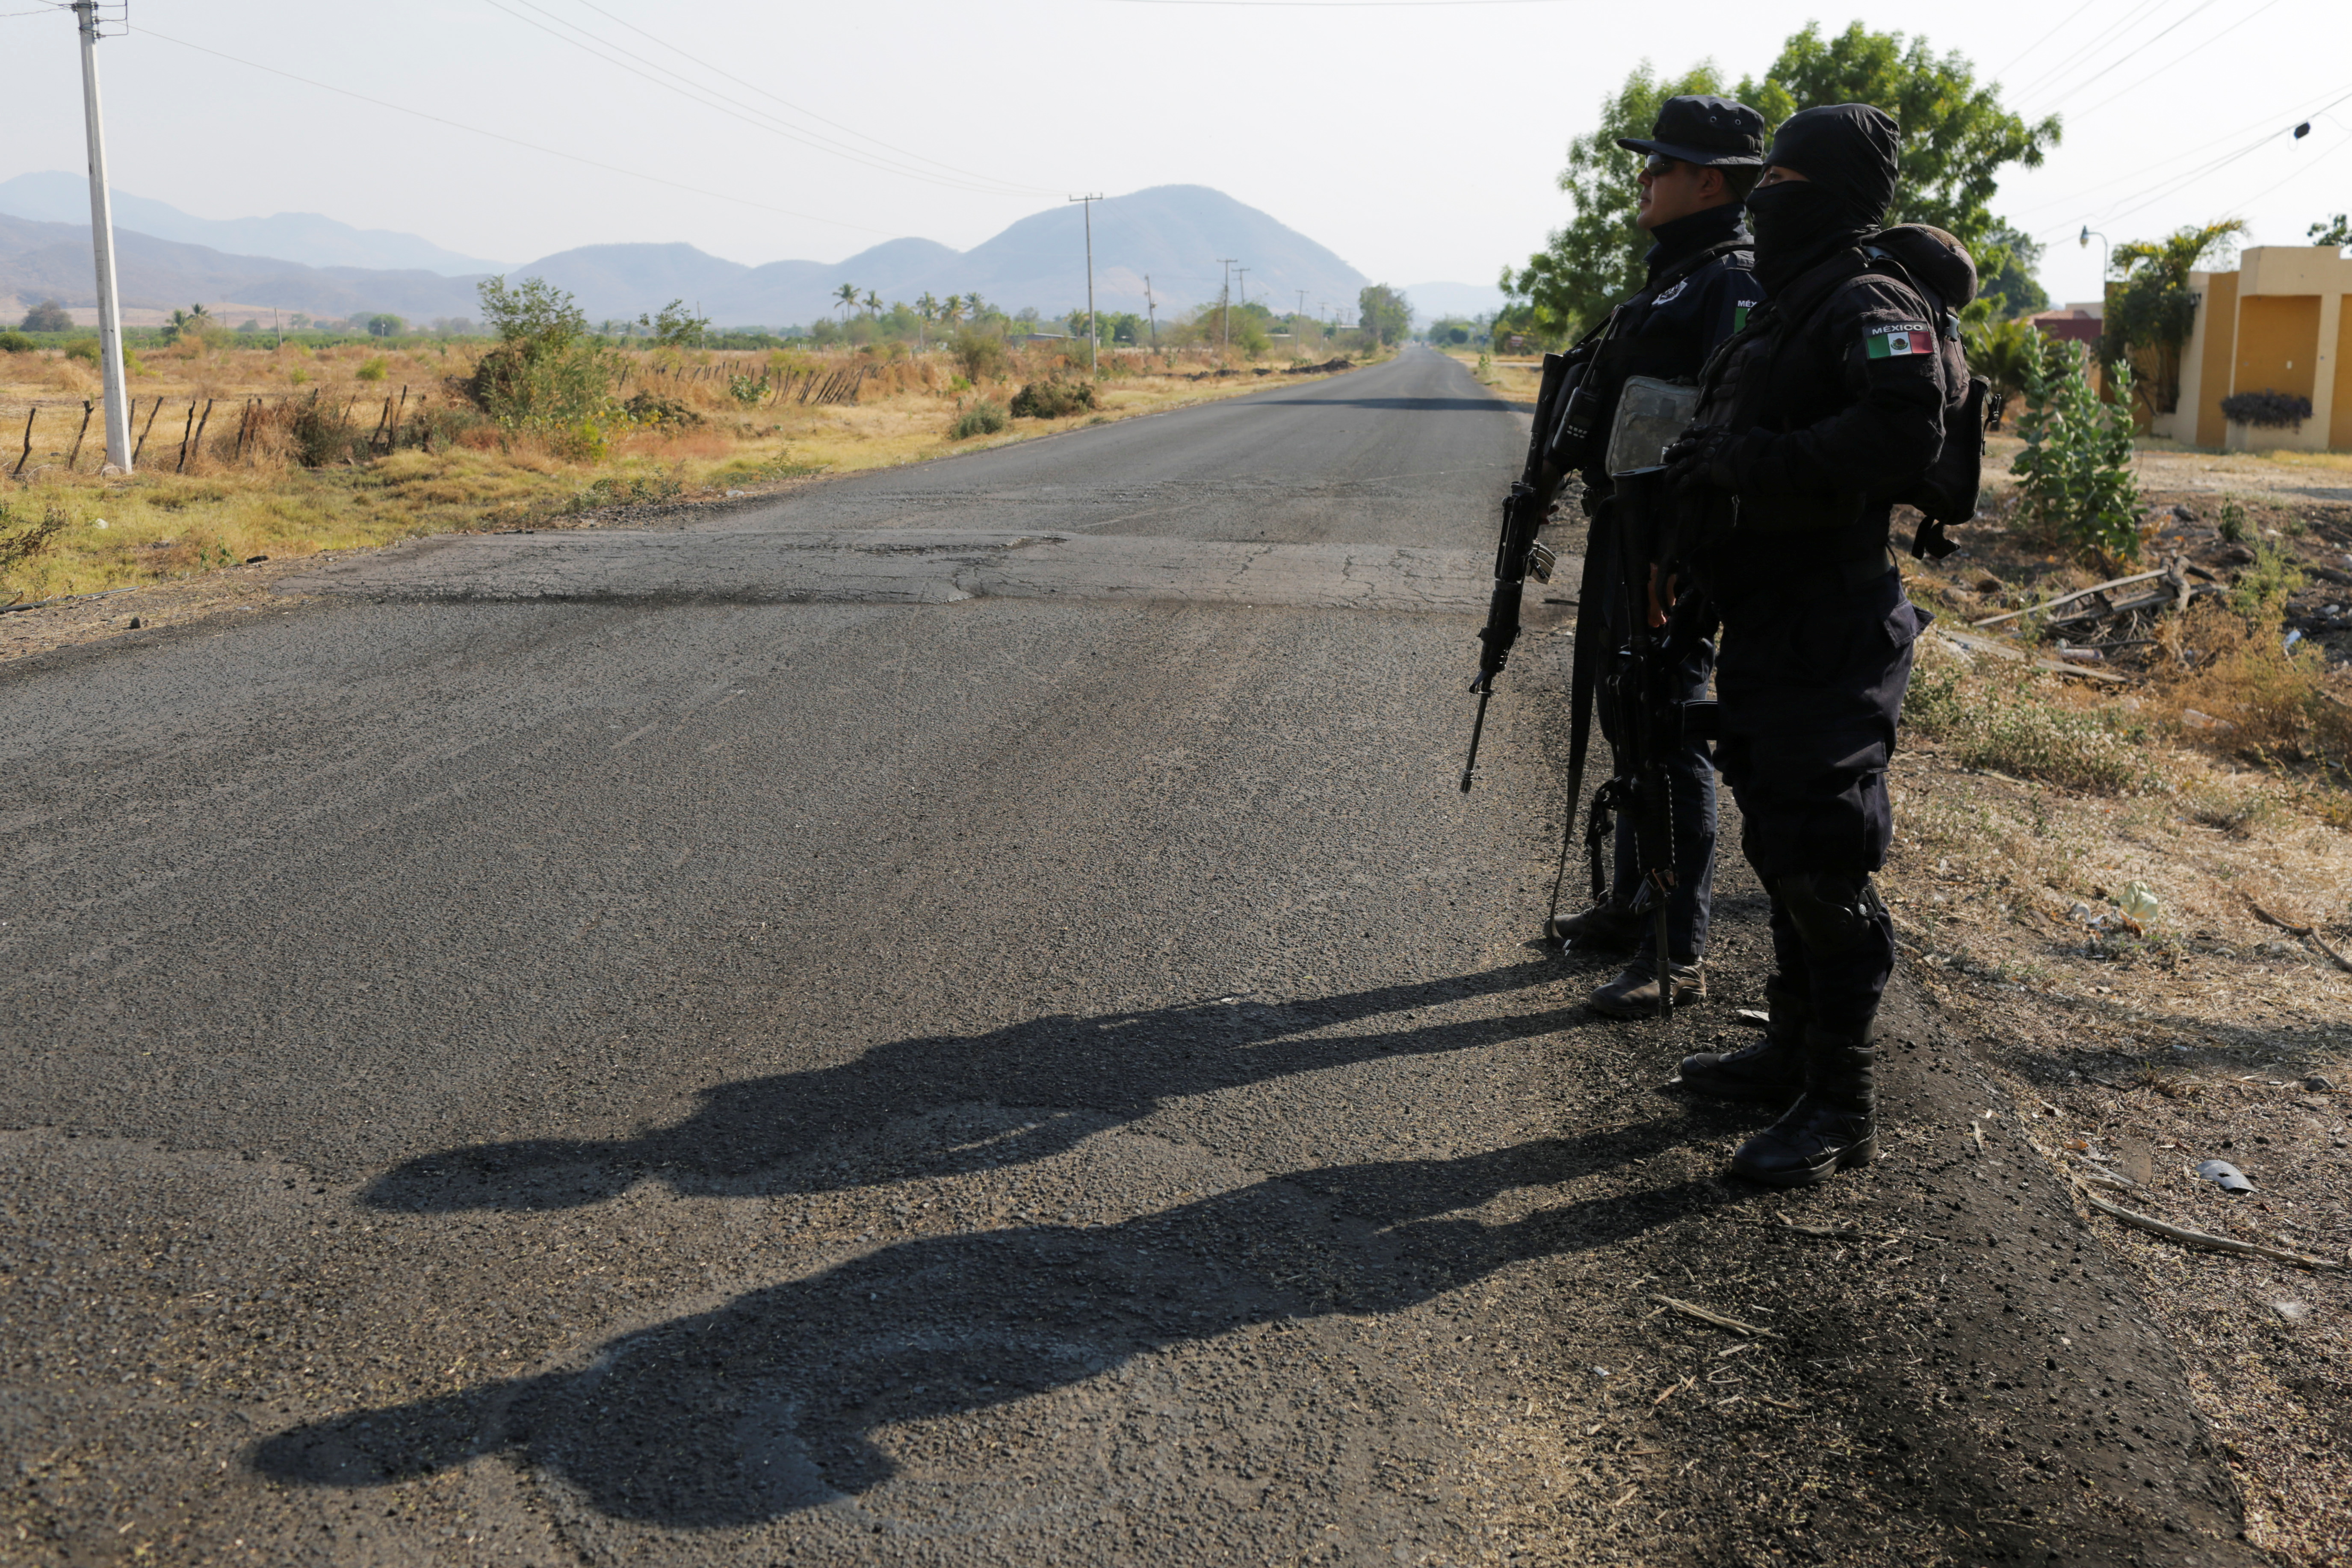 State police officers keep watch at a checkpoint in El Aguaje after the visit of Vatican's ambassador to Mexico Franco Coppola to the area and to the municipality of Aguililla, an area where the Jalisco New Generation Cartel (CJNG) and local drug gangs are fighting to control the territory, in Michoacan state, Mexico April 23, 2021. REUTERS/Alan Ortega